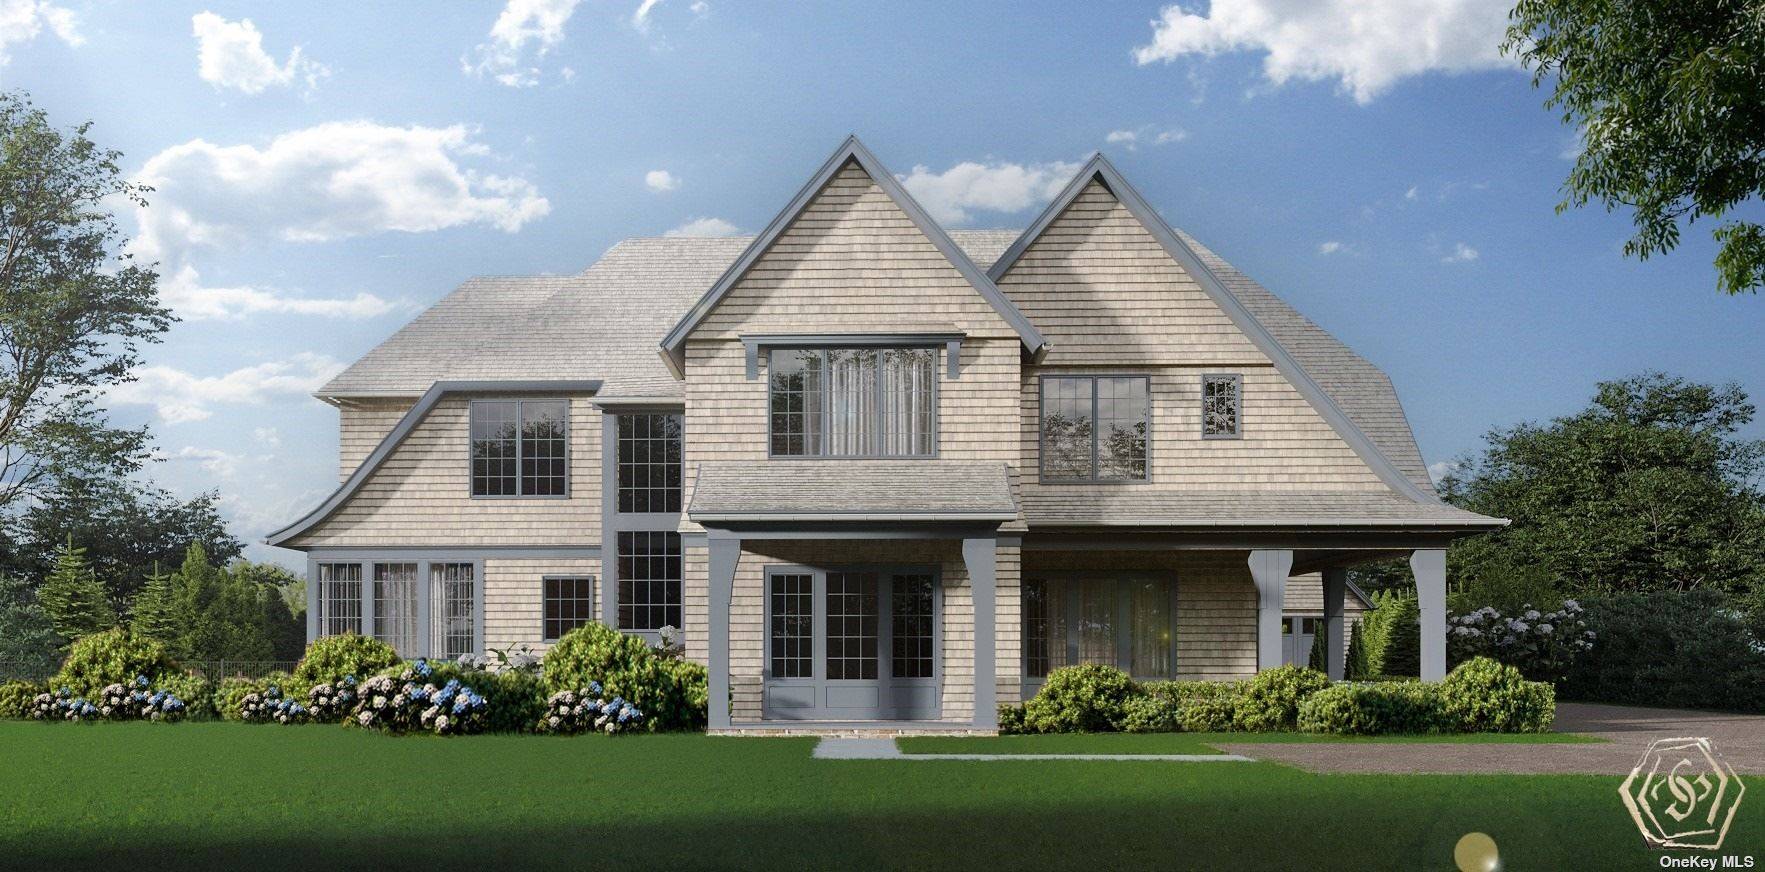 Nicholas Hogan amp ; Michael McDonald of Sterling Home Developers are ready to break ground on a beautiful Southampton Village location that backs to 7.